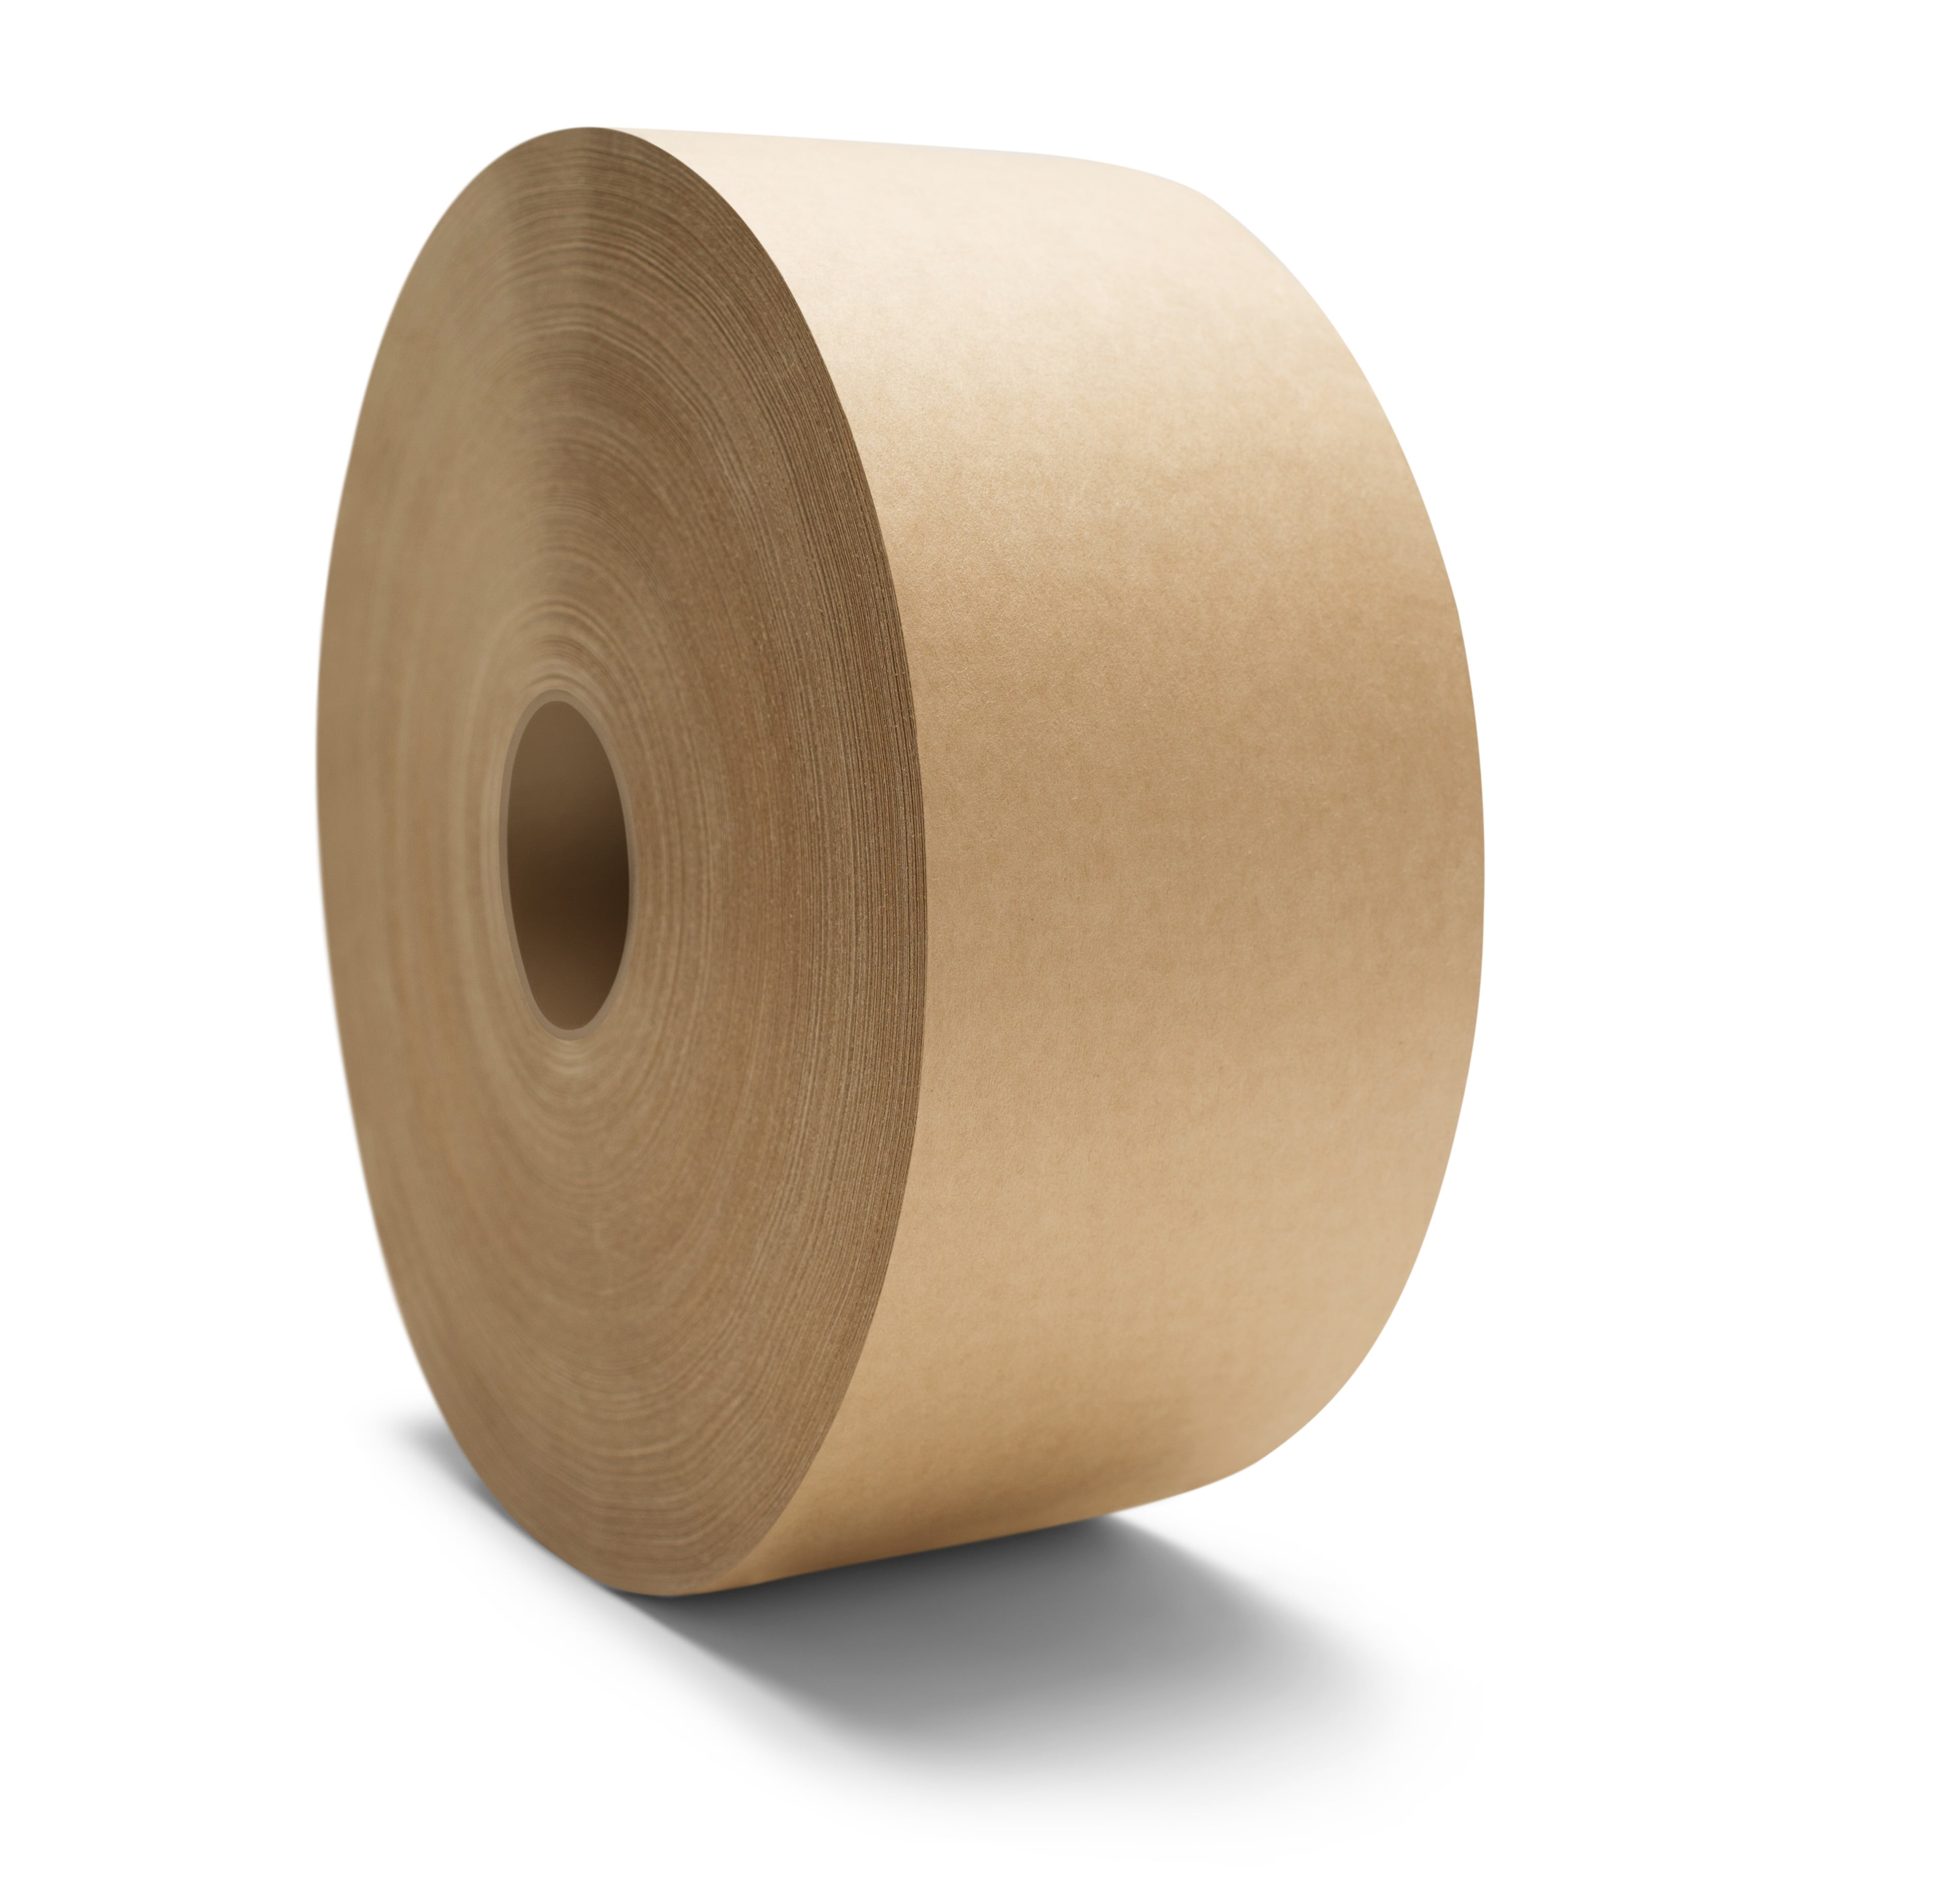 2 ROLLS OF EXTRA WIDE 3" BROWN PACKING TAPE 72mm x 66M 